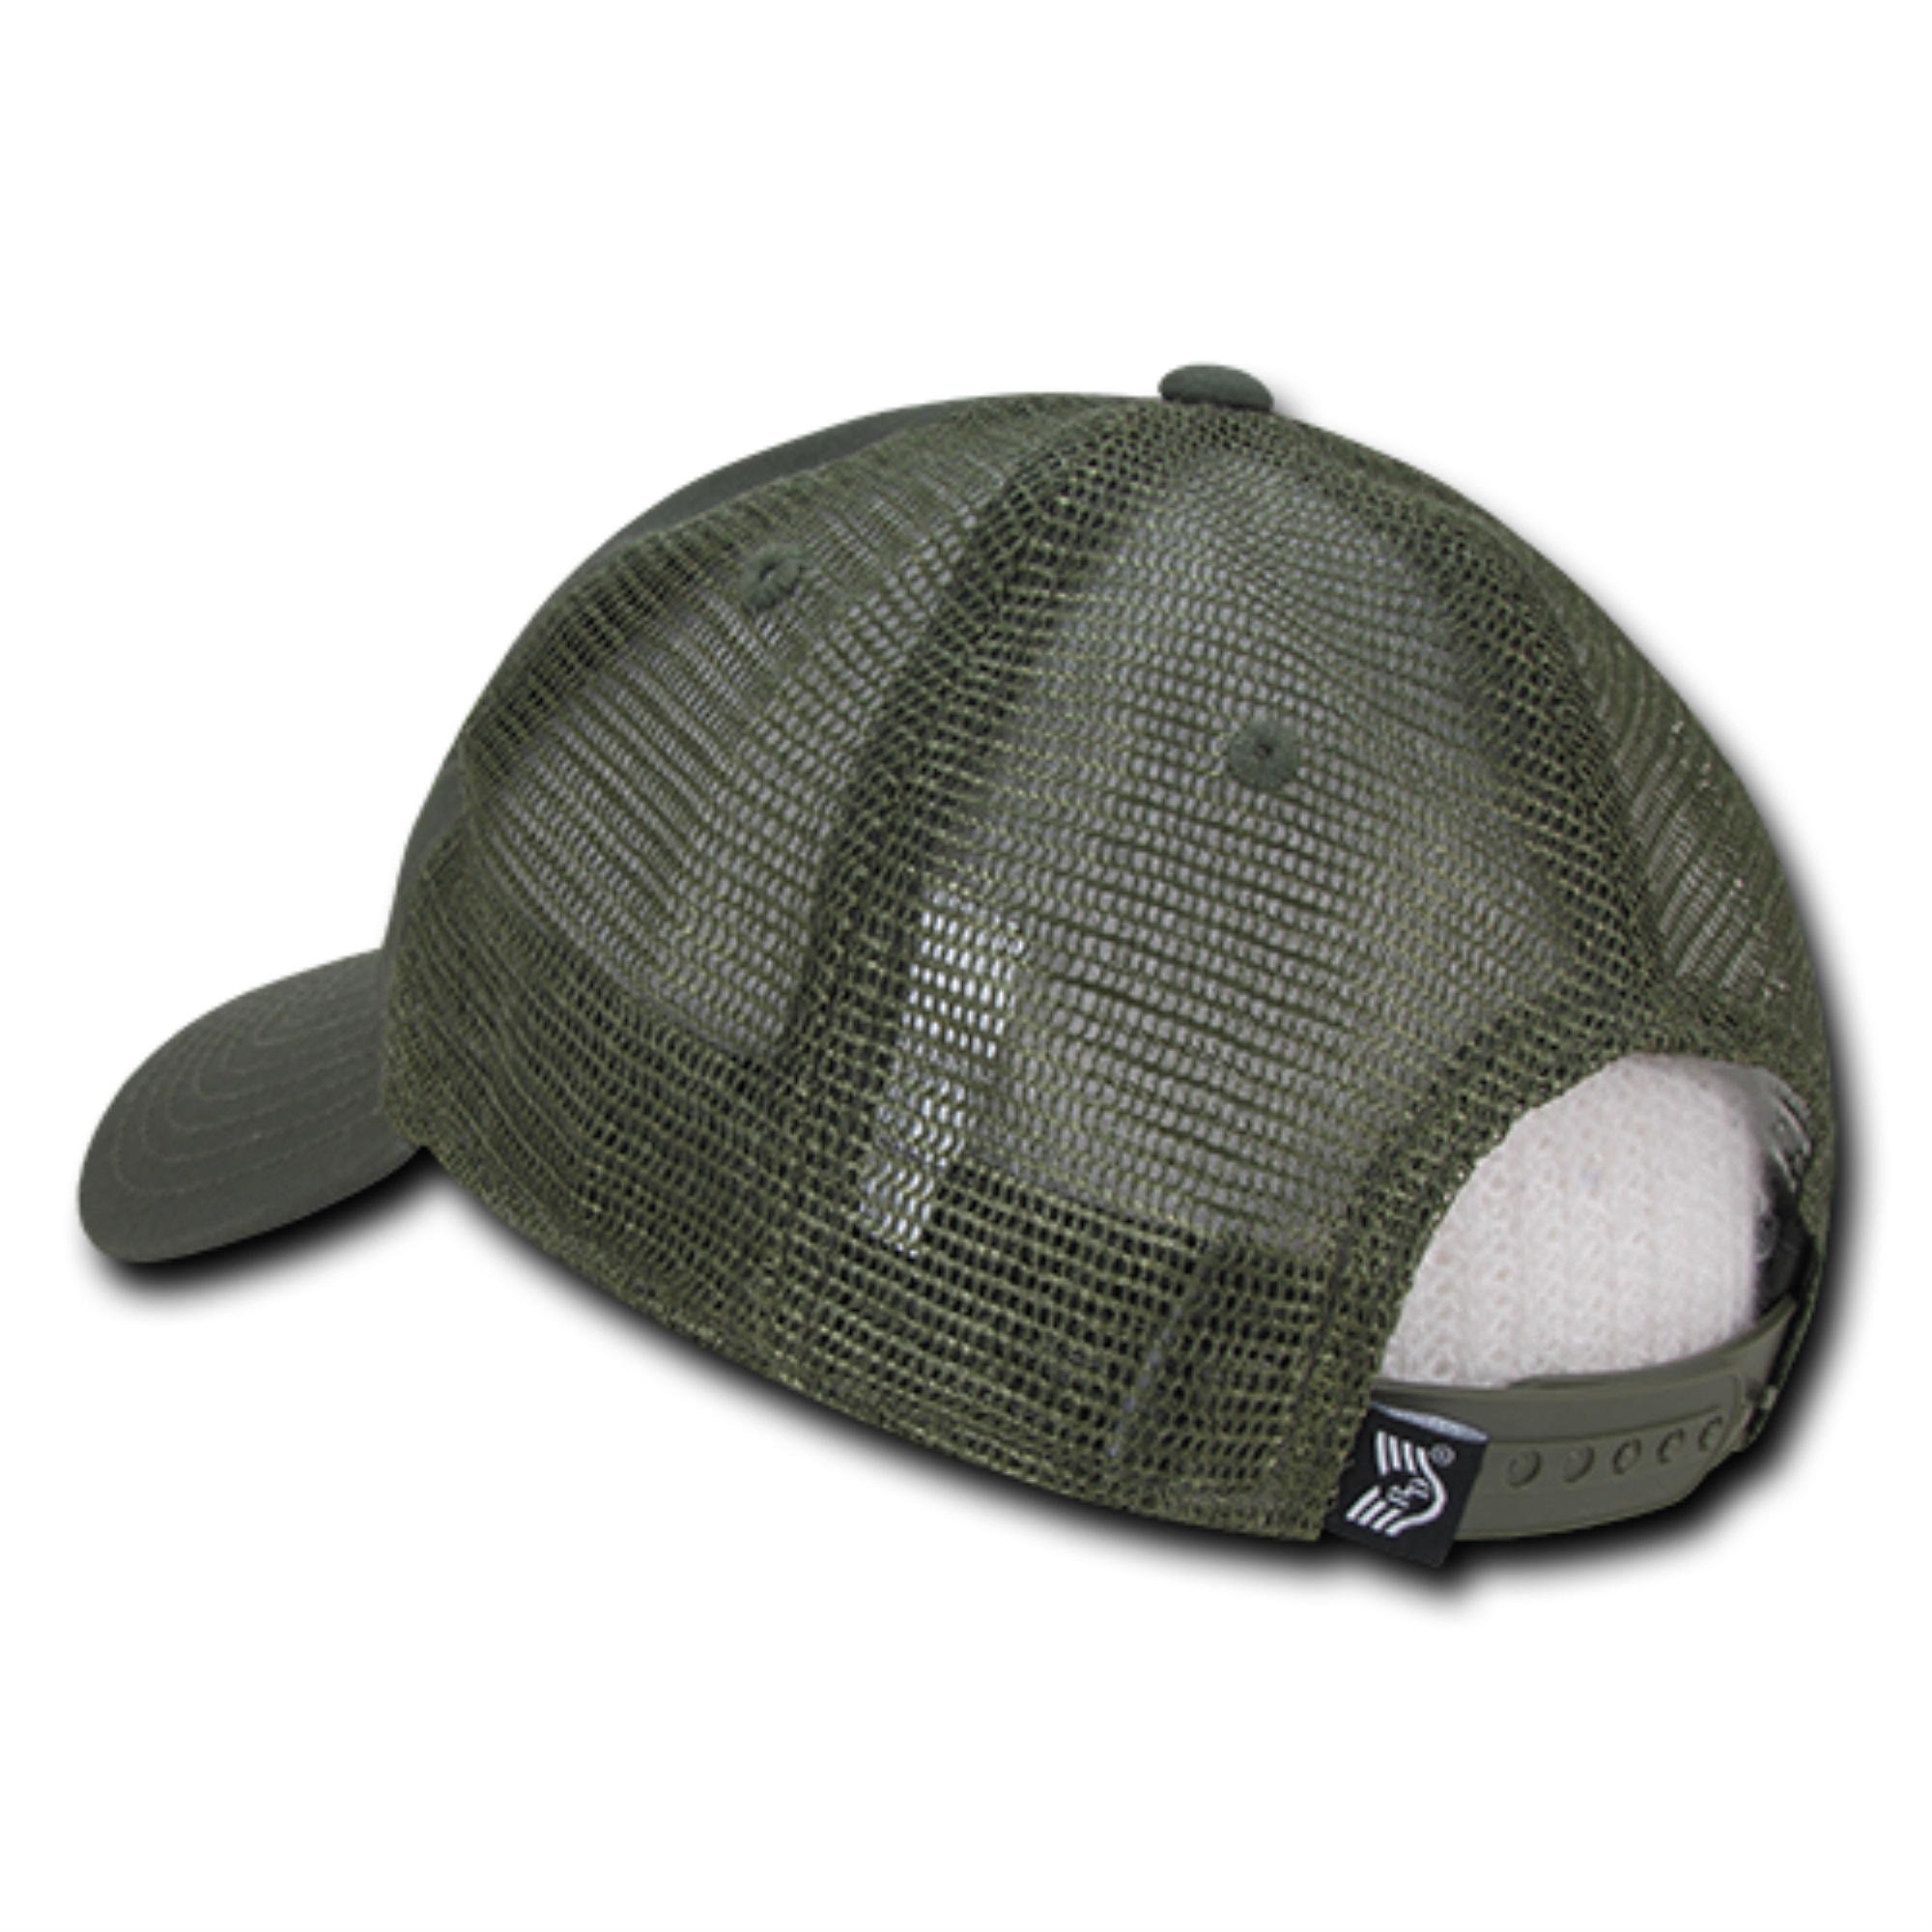 Rapid Dominance A05-FIF-OLV Freedom Relaxed Trucker USA Cap, Olive - image 3 of 3